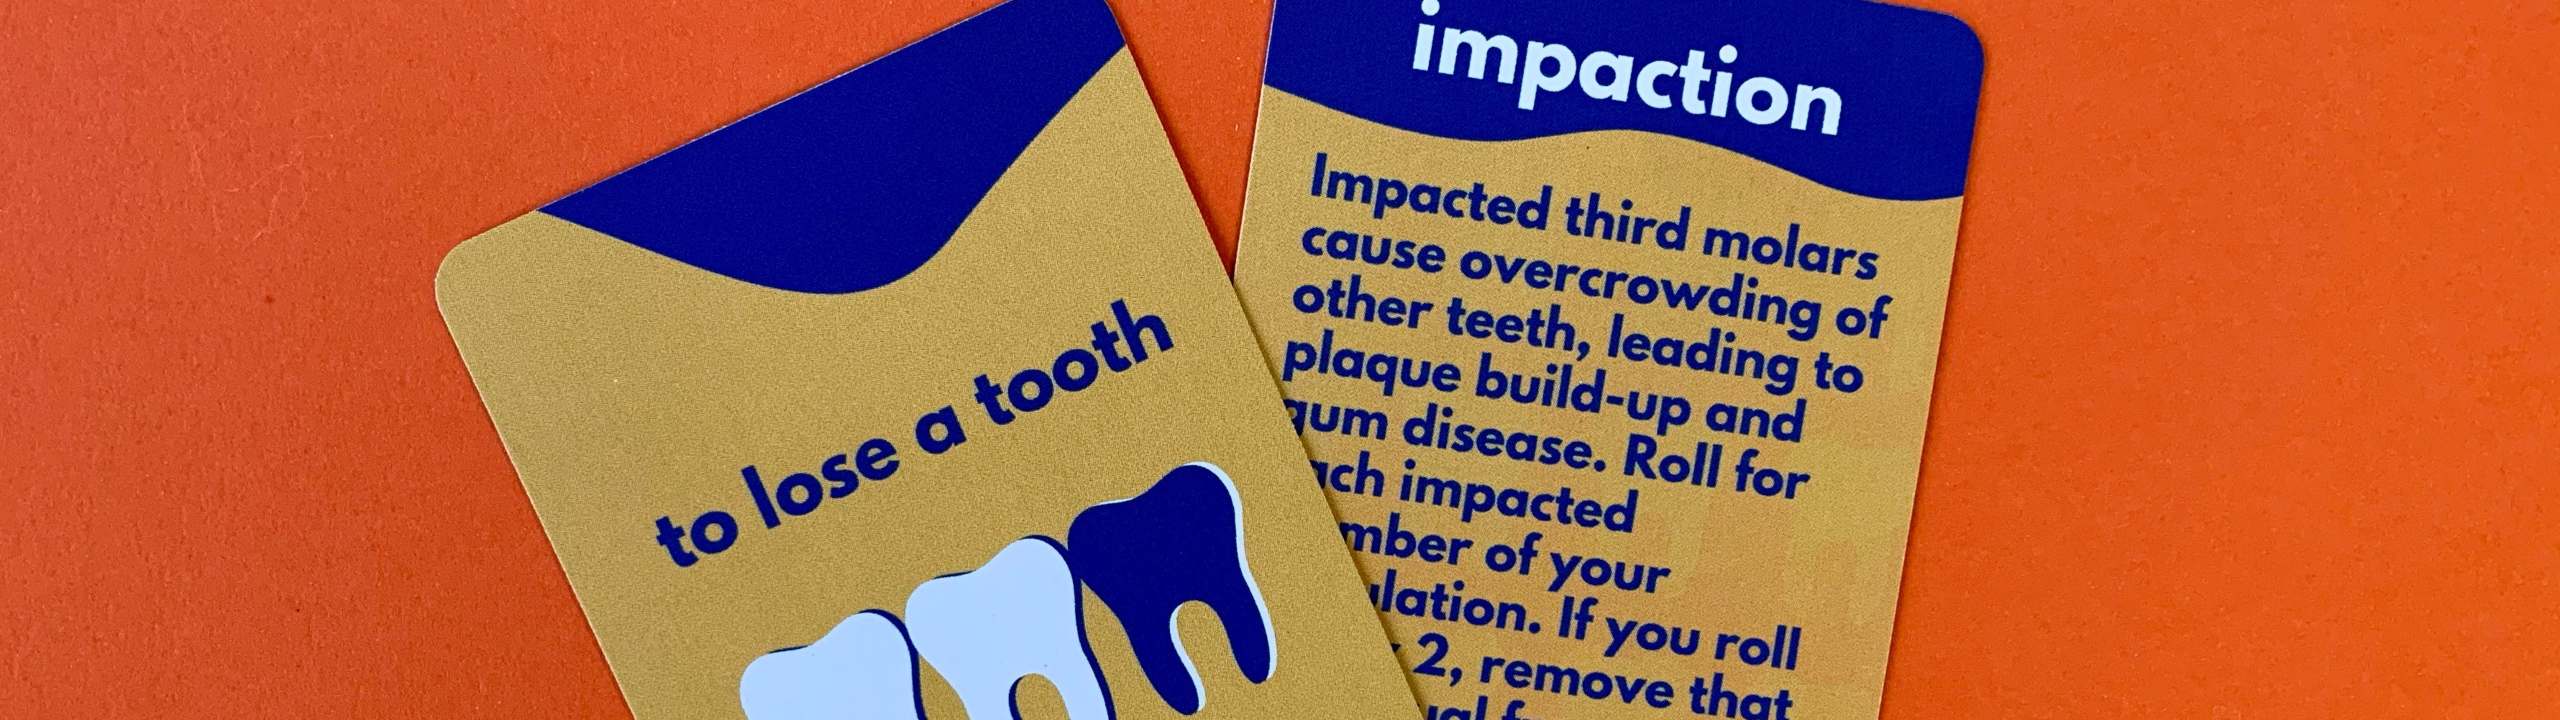 To lose a tooth activity cards